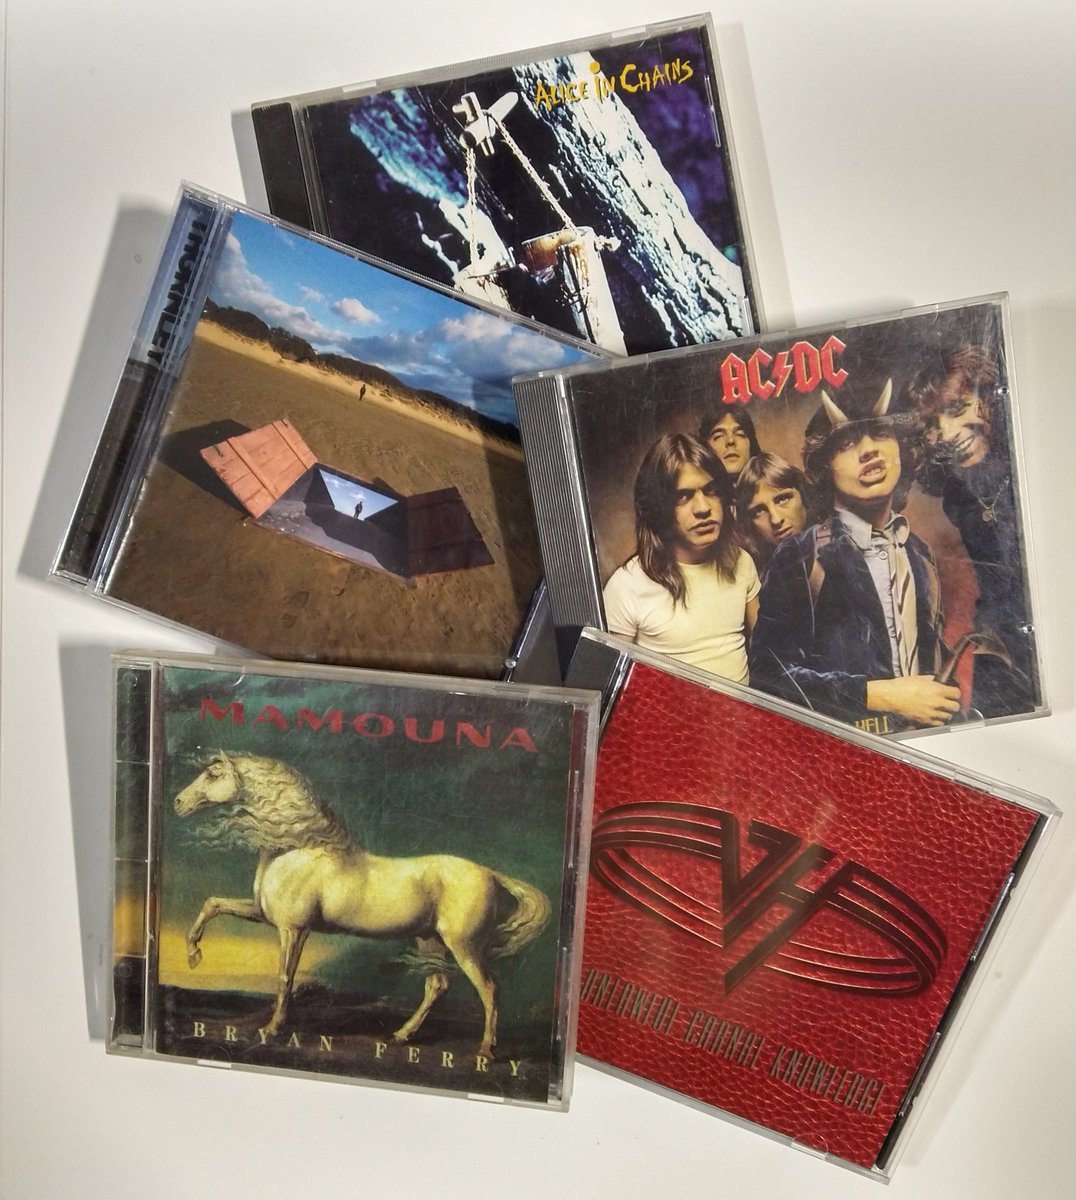 The automobiles musical choices have been replenished.  #AliceInChains #Thornley #ACDC #BryanFerry #VanHalen #CD #CompactDisc #Automotive #CarStereo #OnTheRoad